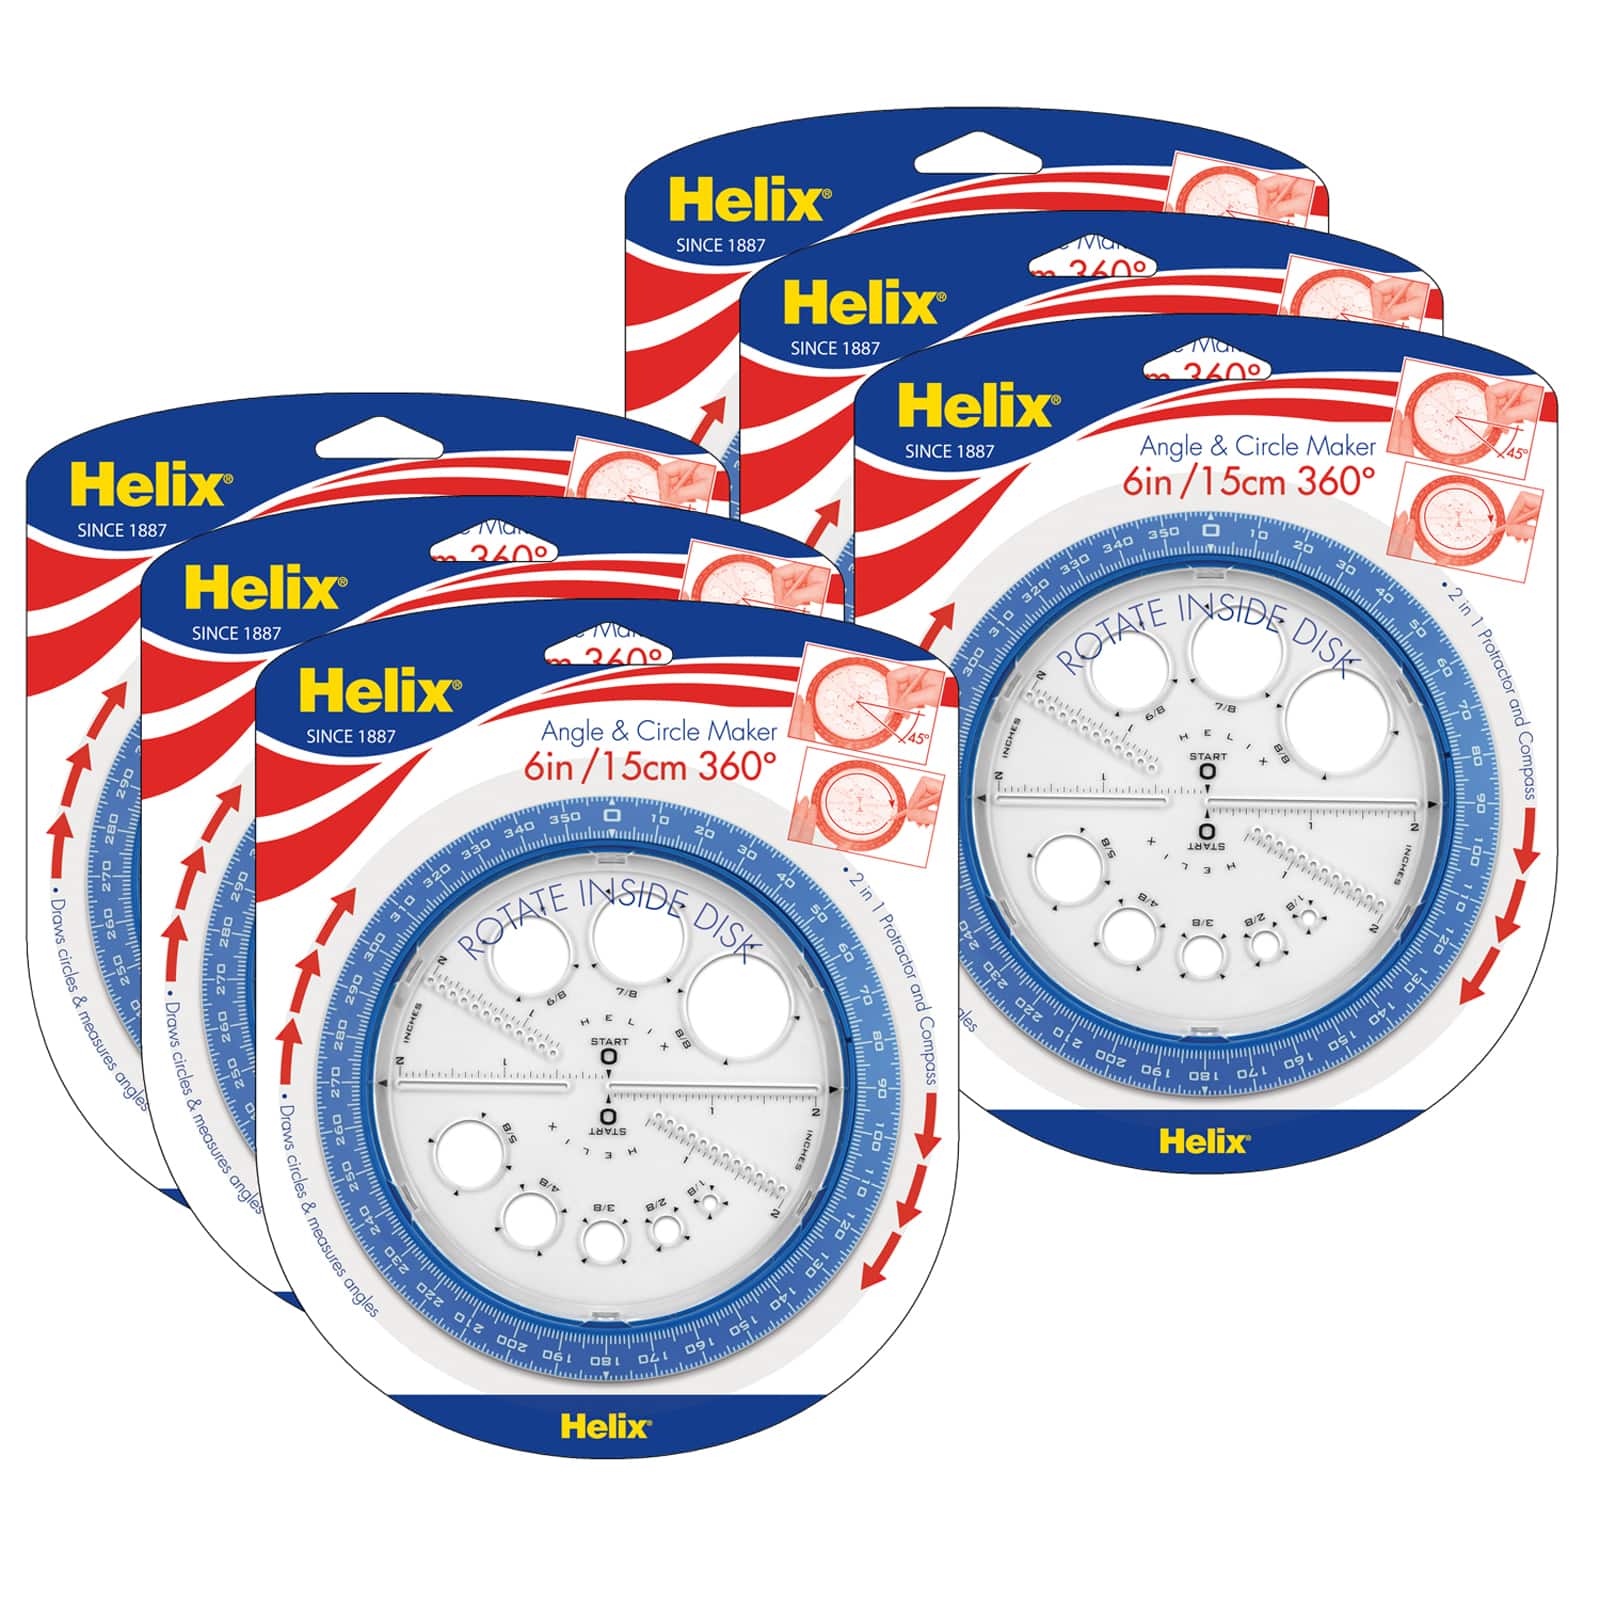 6 Inch / 15cm 360 Degree 36002 Assorted Colors Helix Angle and Circle Maker with Integrated Circle Templates 